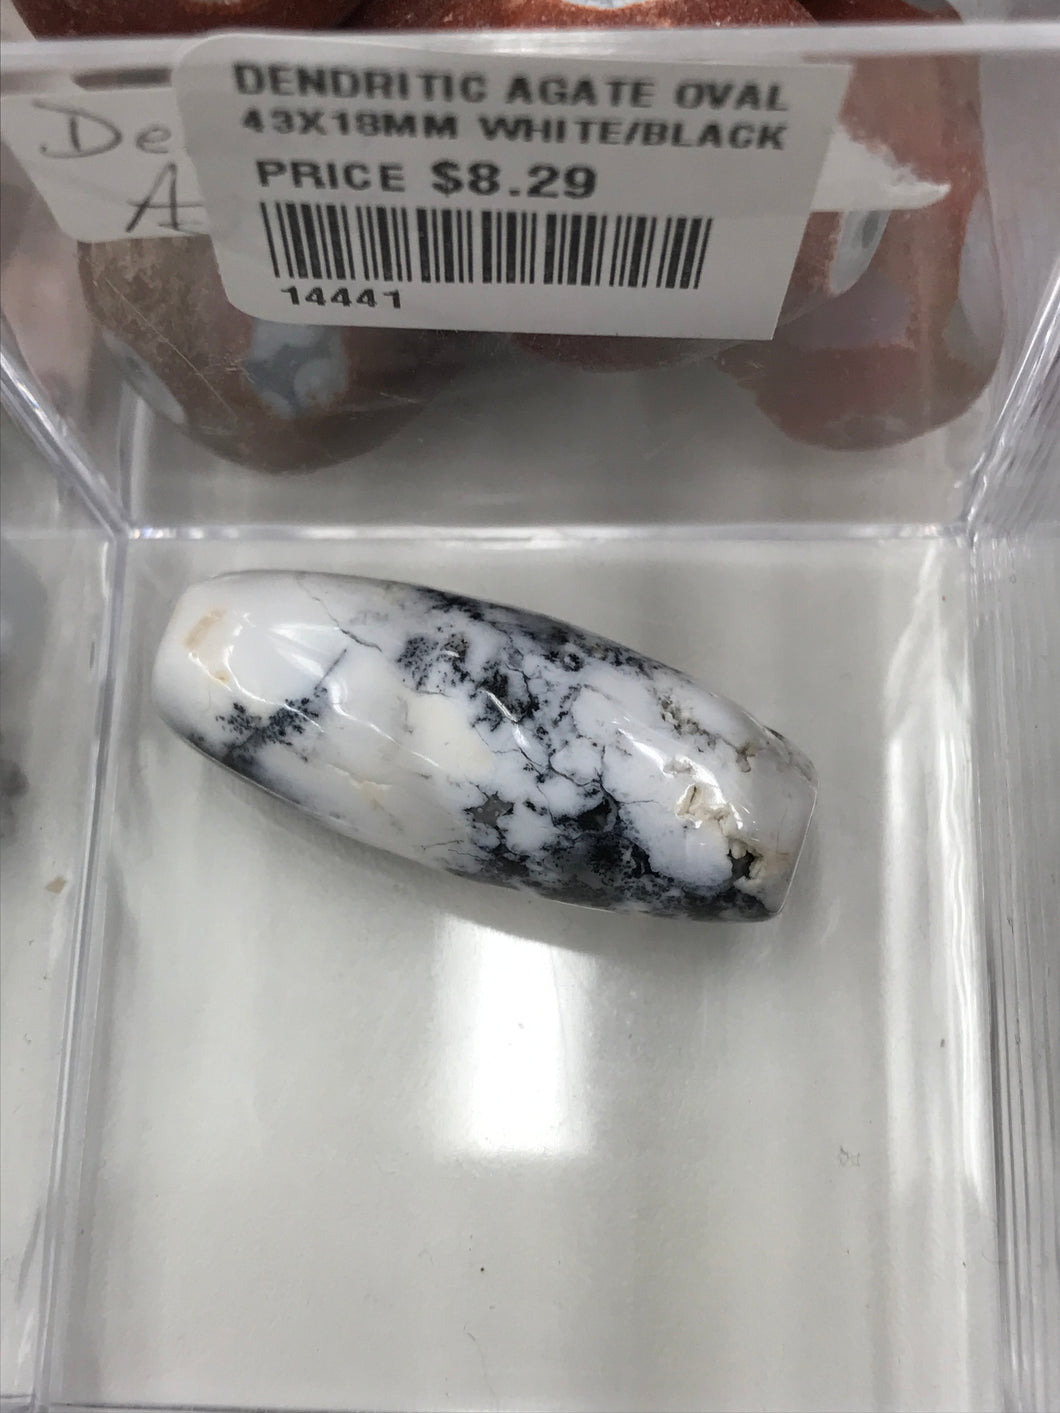 DENDRITIC AGATE OVAL 43X18MM